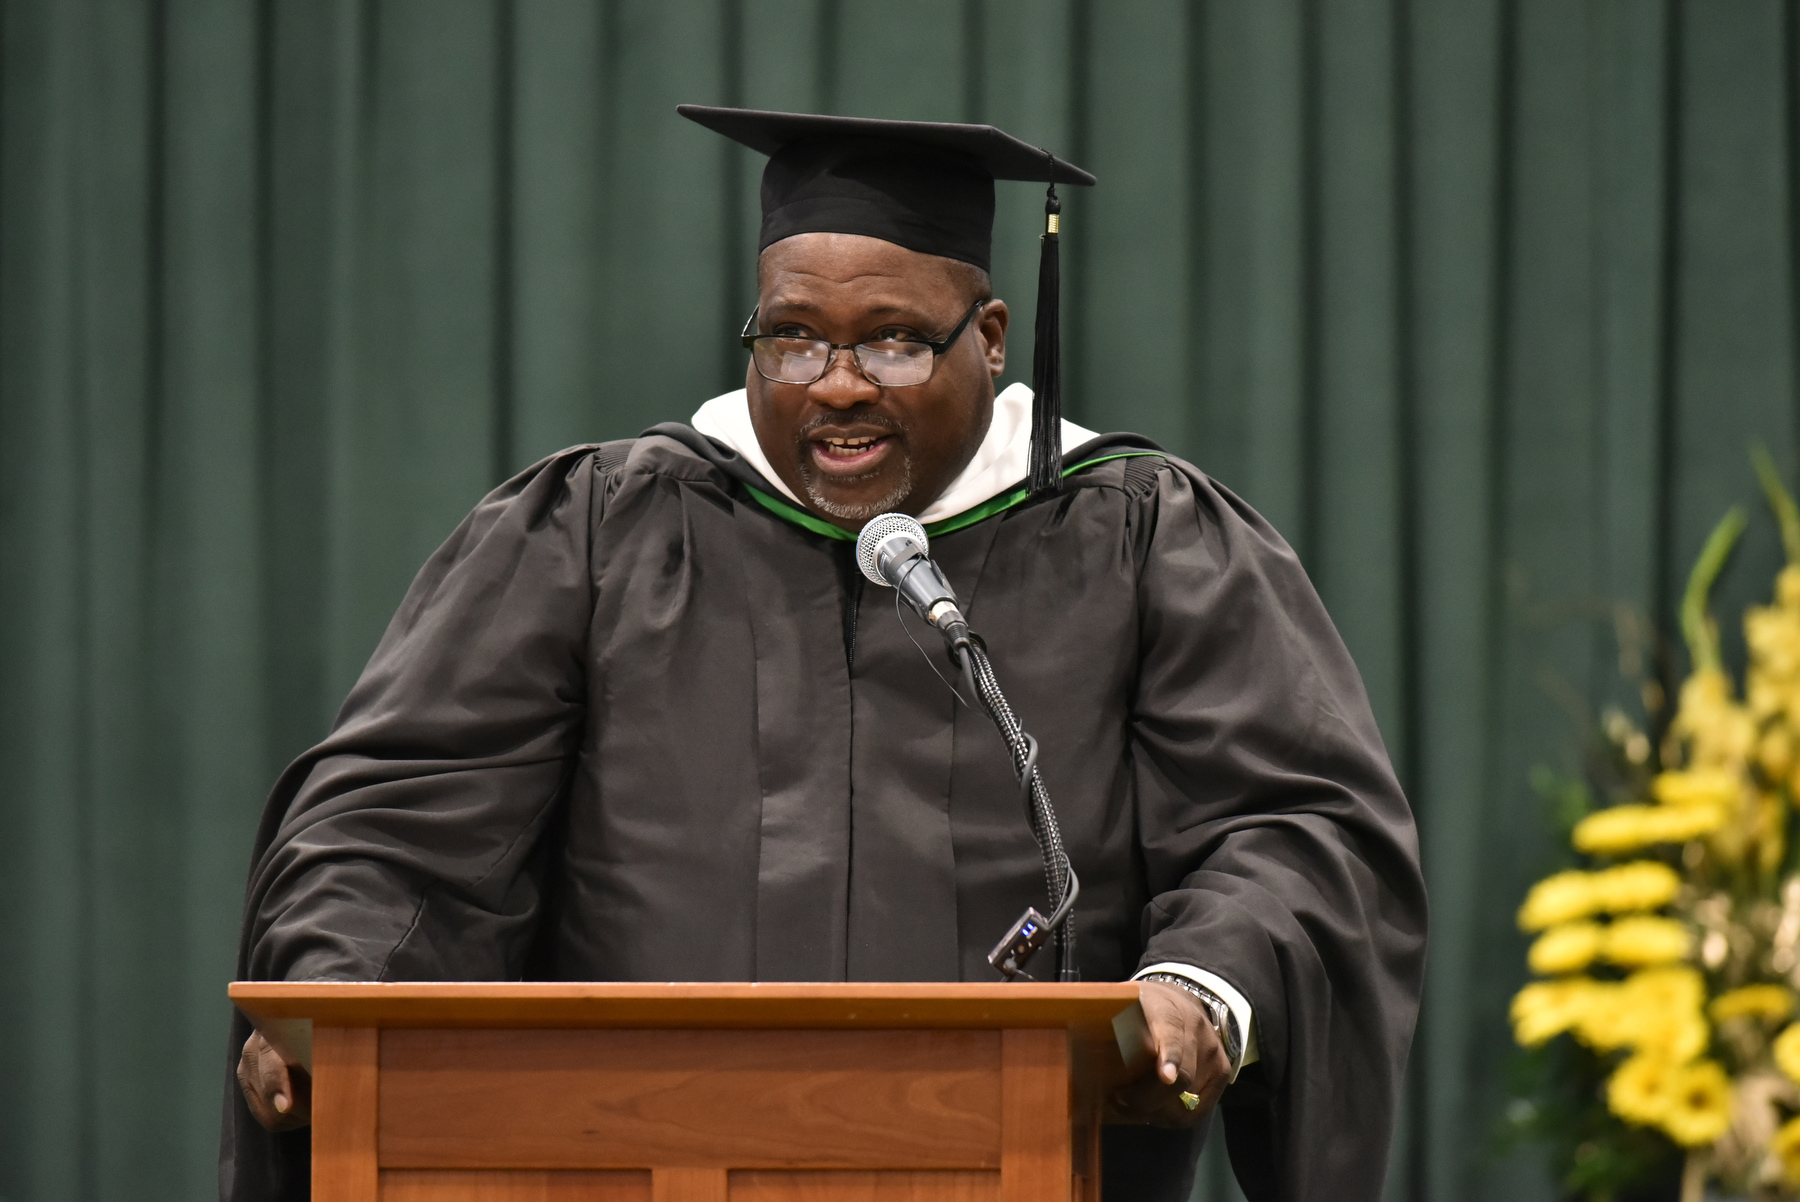 Keynote speaker for the 4 p.m. combined School of Communication, Media and the Arts and School of Education ceremony was Anthony Q. Davis, superintendent of the Syracuse City School District.